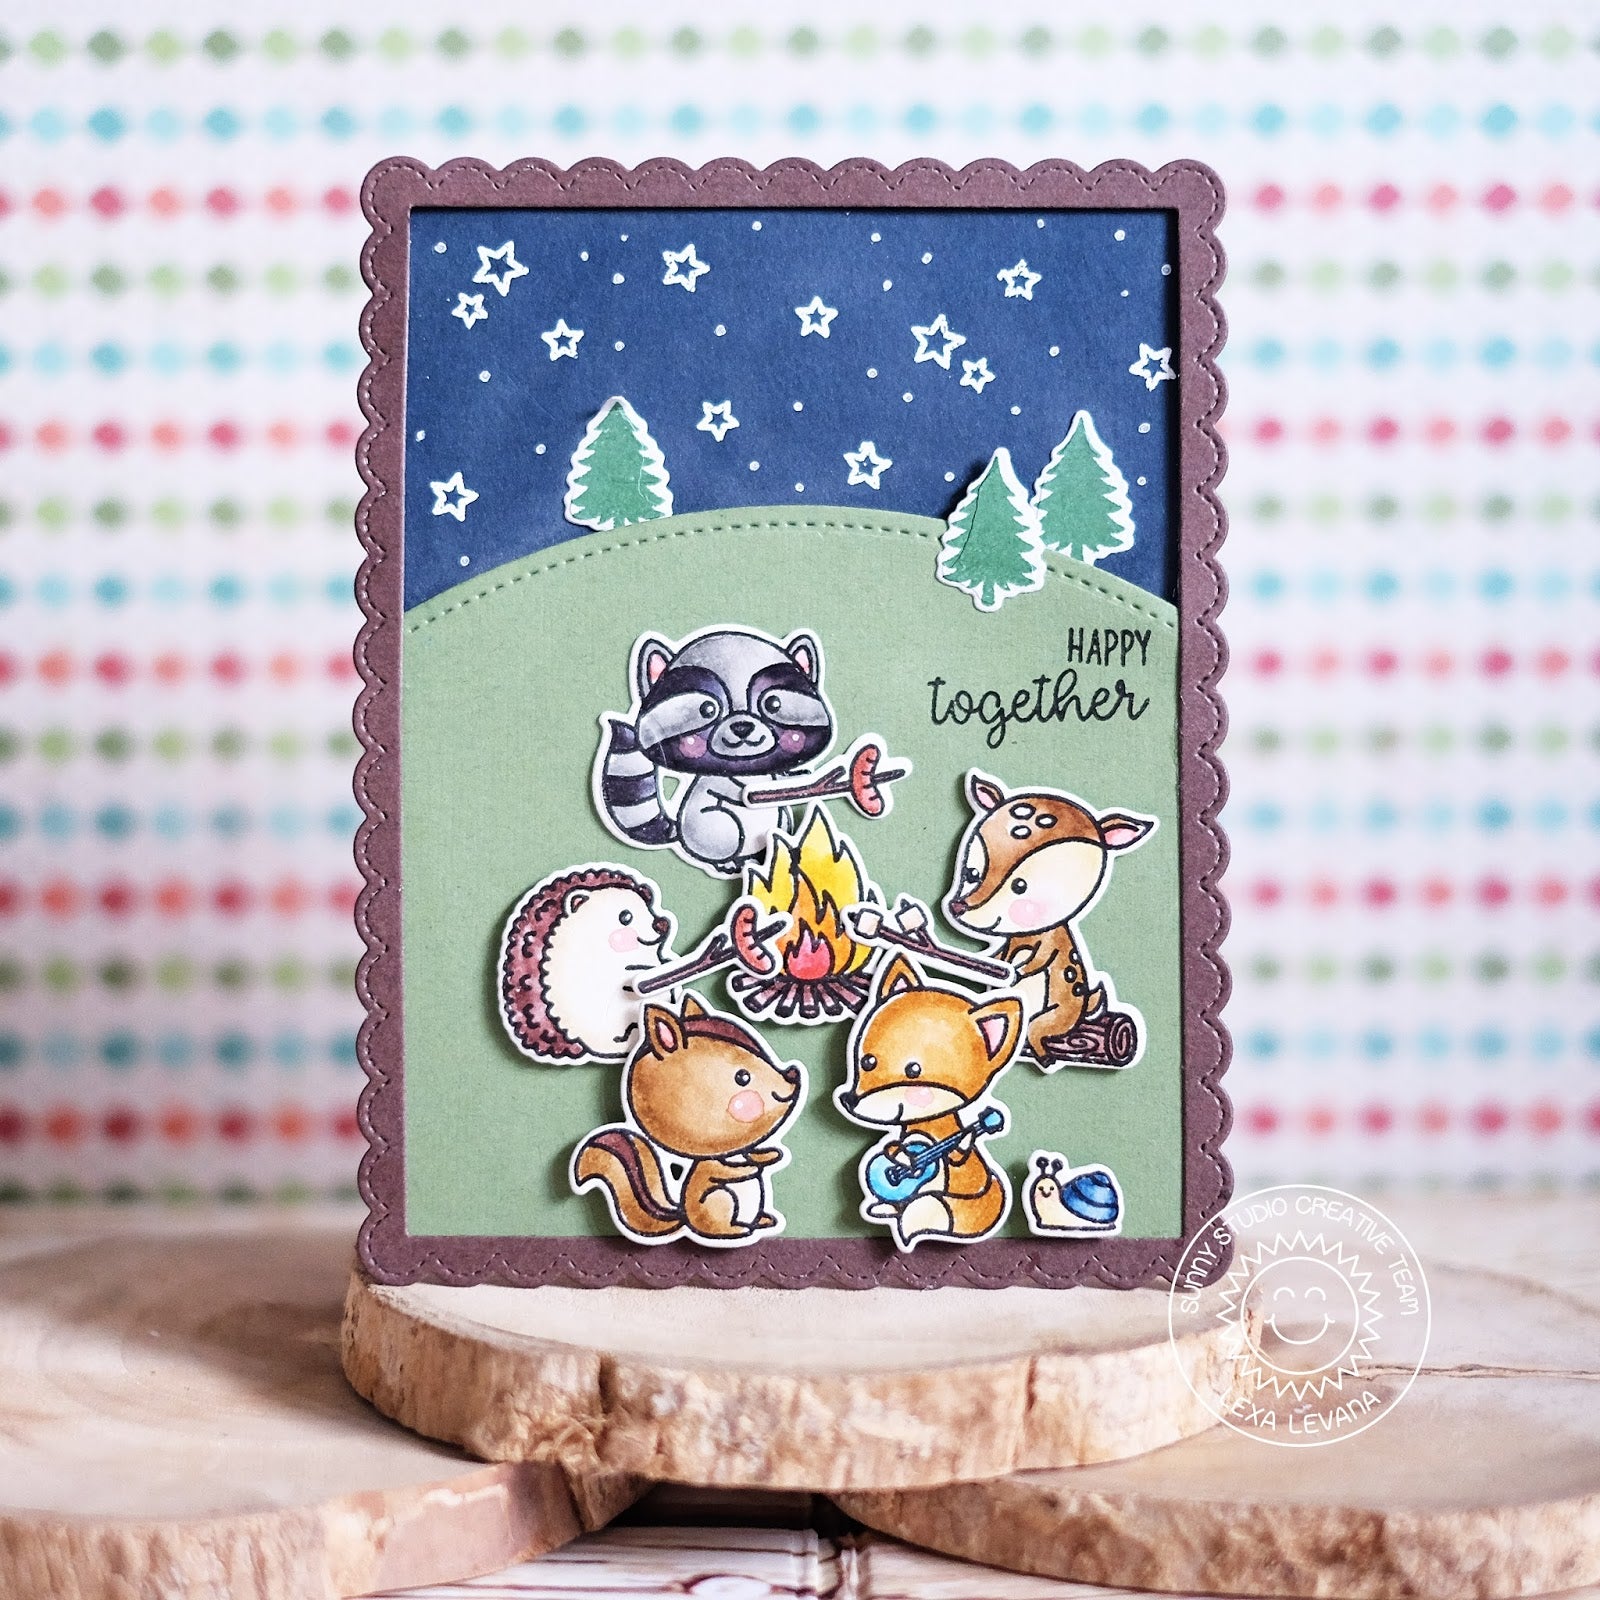 Sunny Studio Stamps Woodland Camping Card using Fancy Frames Stitched Scalloped Rectangle Dies